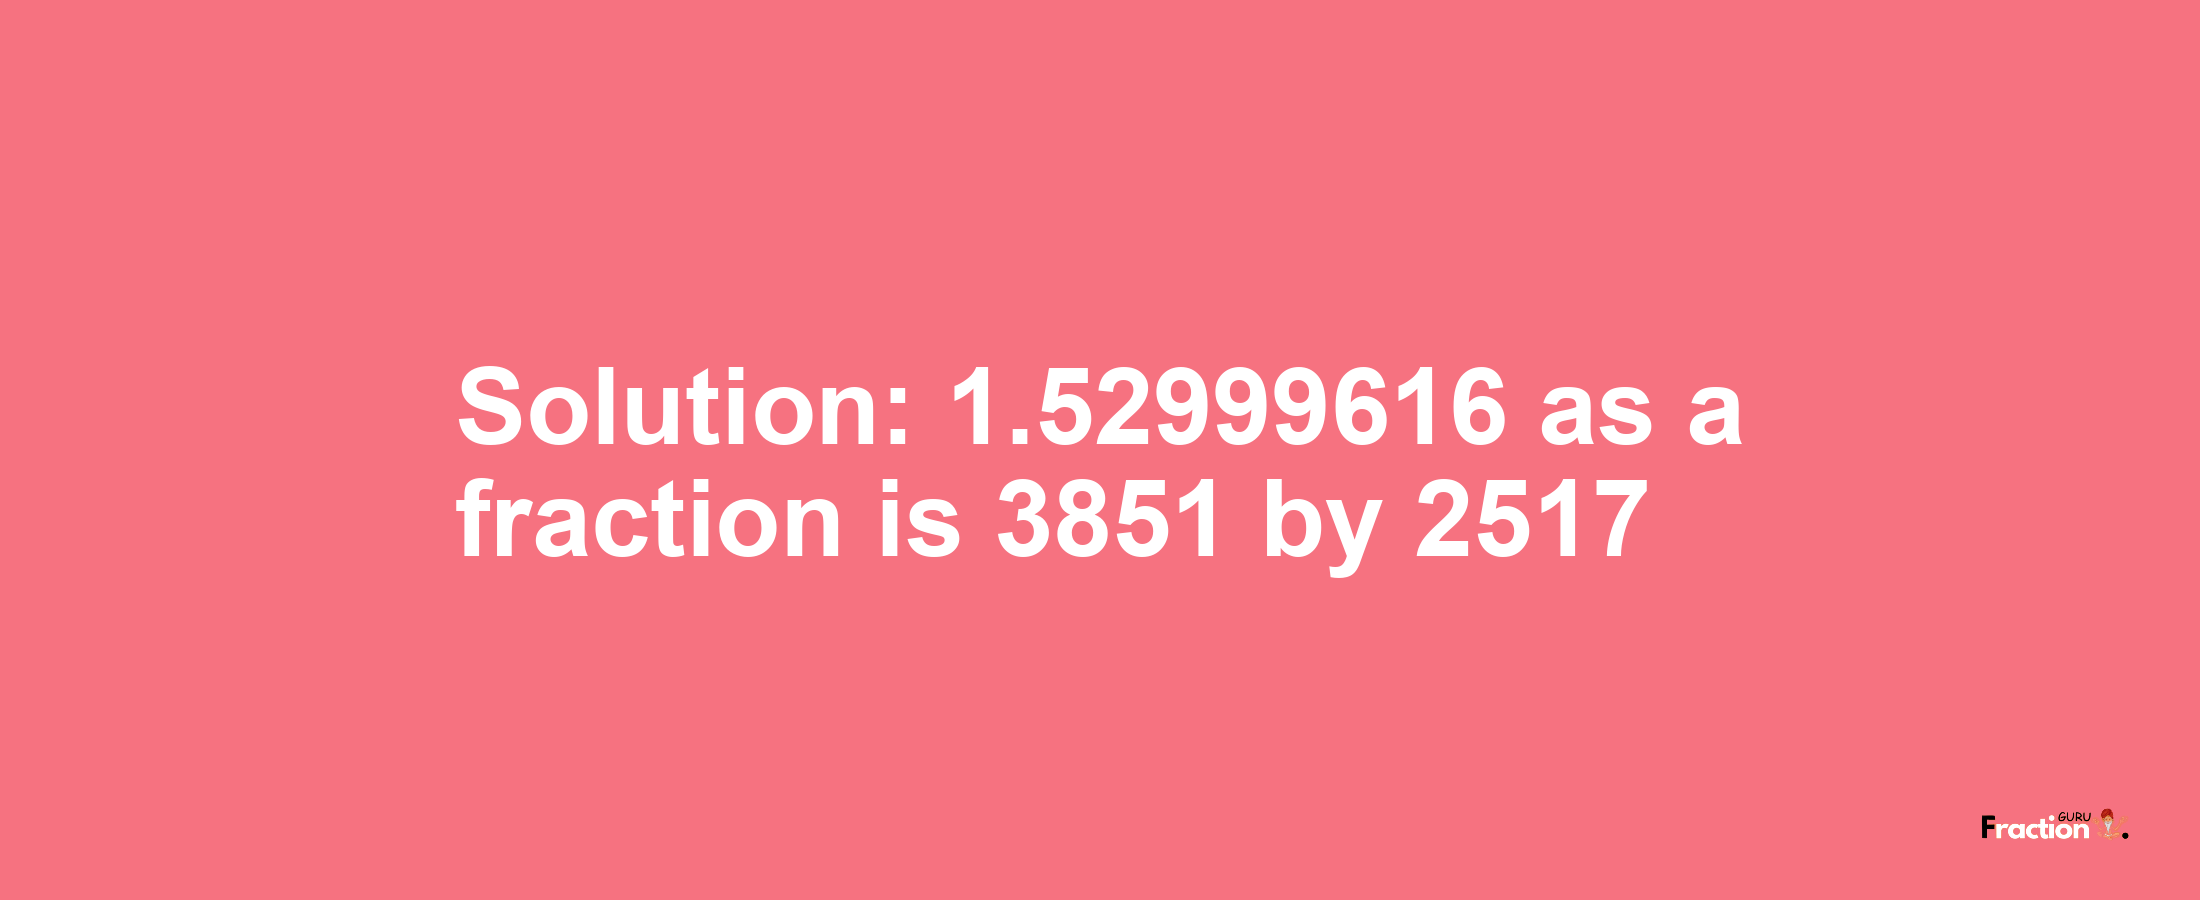 Solution:1.52999616 as a fraction is 3851/2517